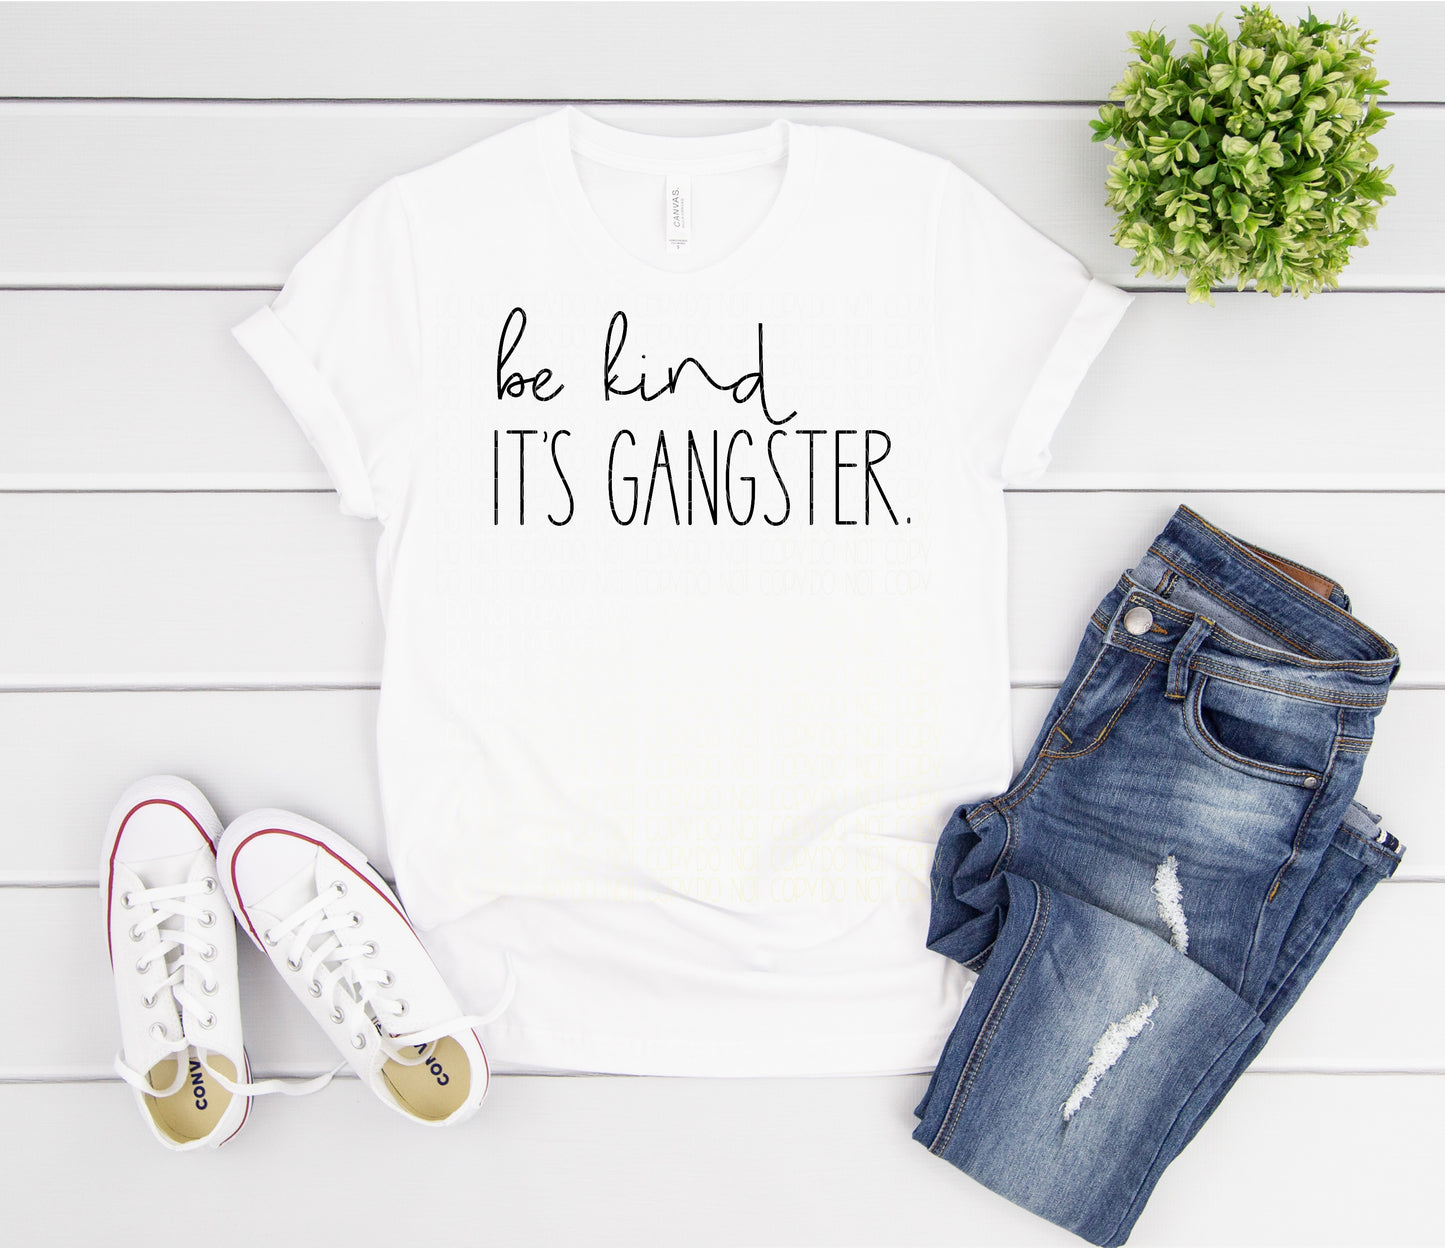 Be kind. It’s gangster